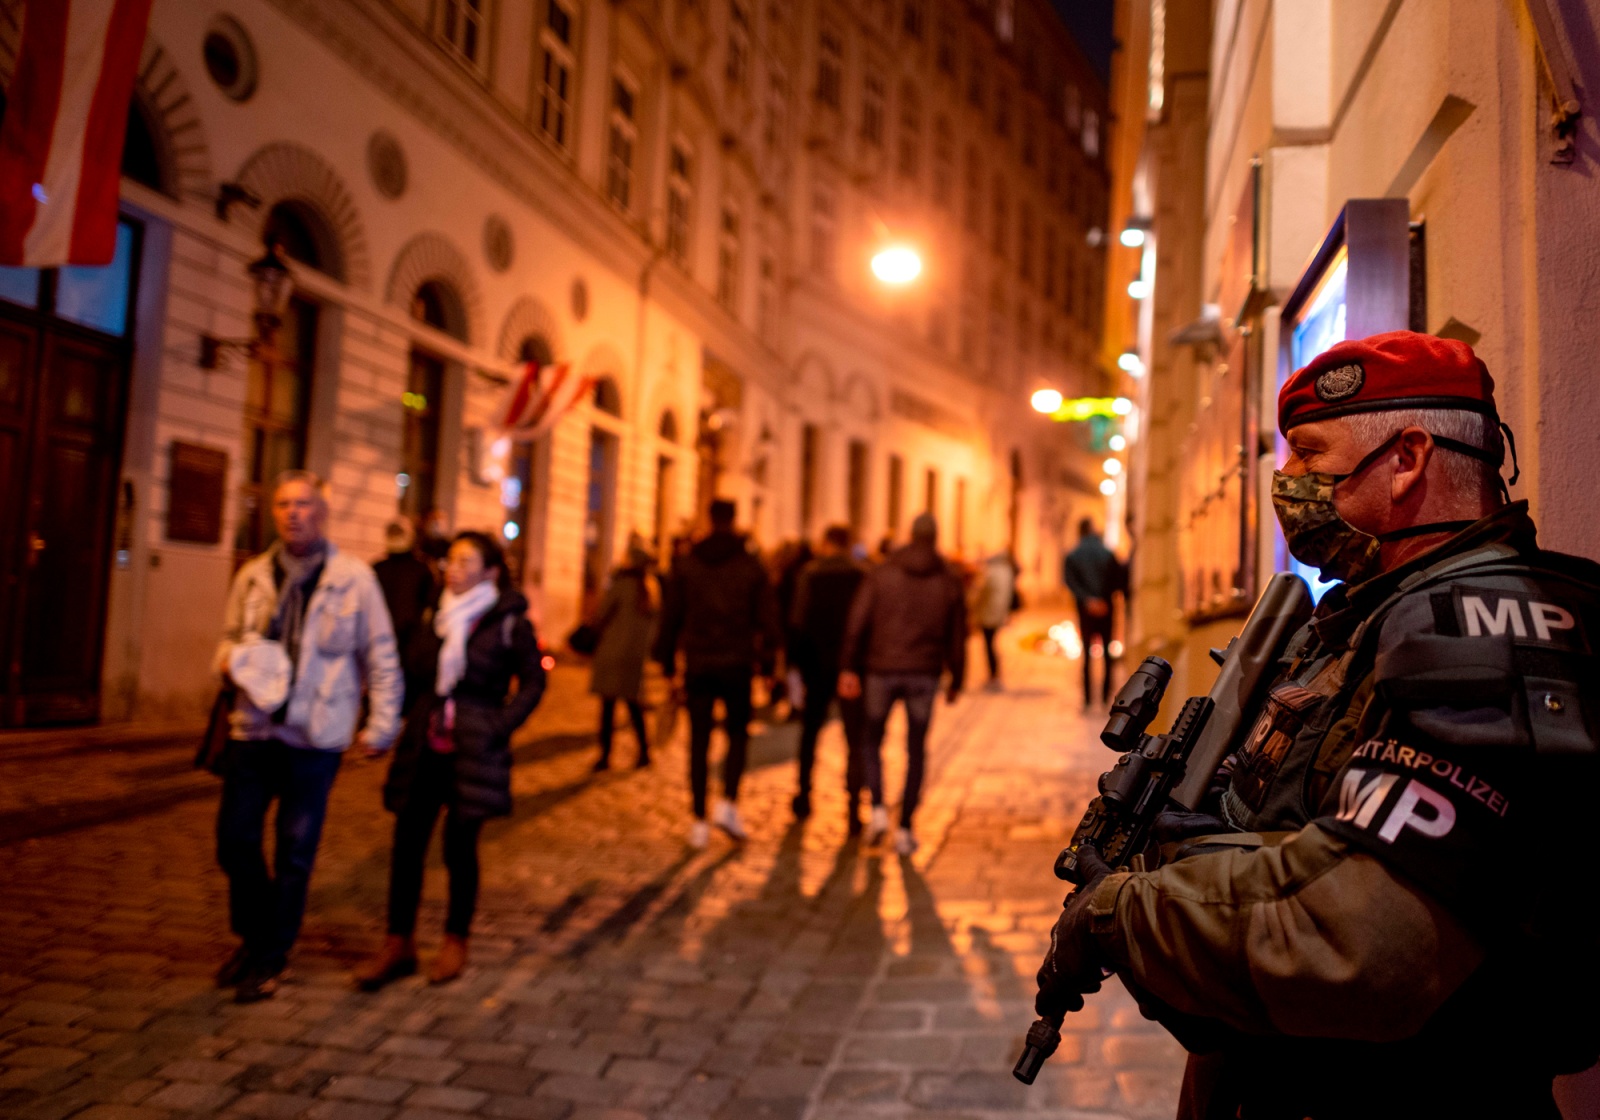 A military police officer stands guard near the site of the Nov. 2 terror attack in Vienna, Austria, on Nov. 4.